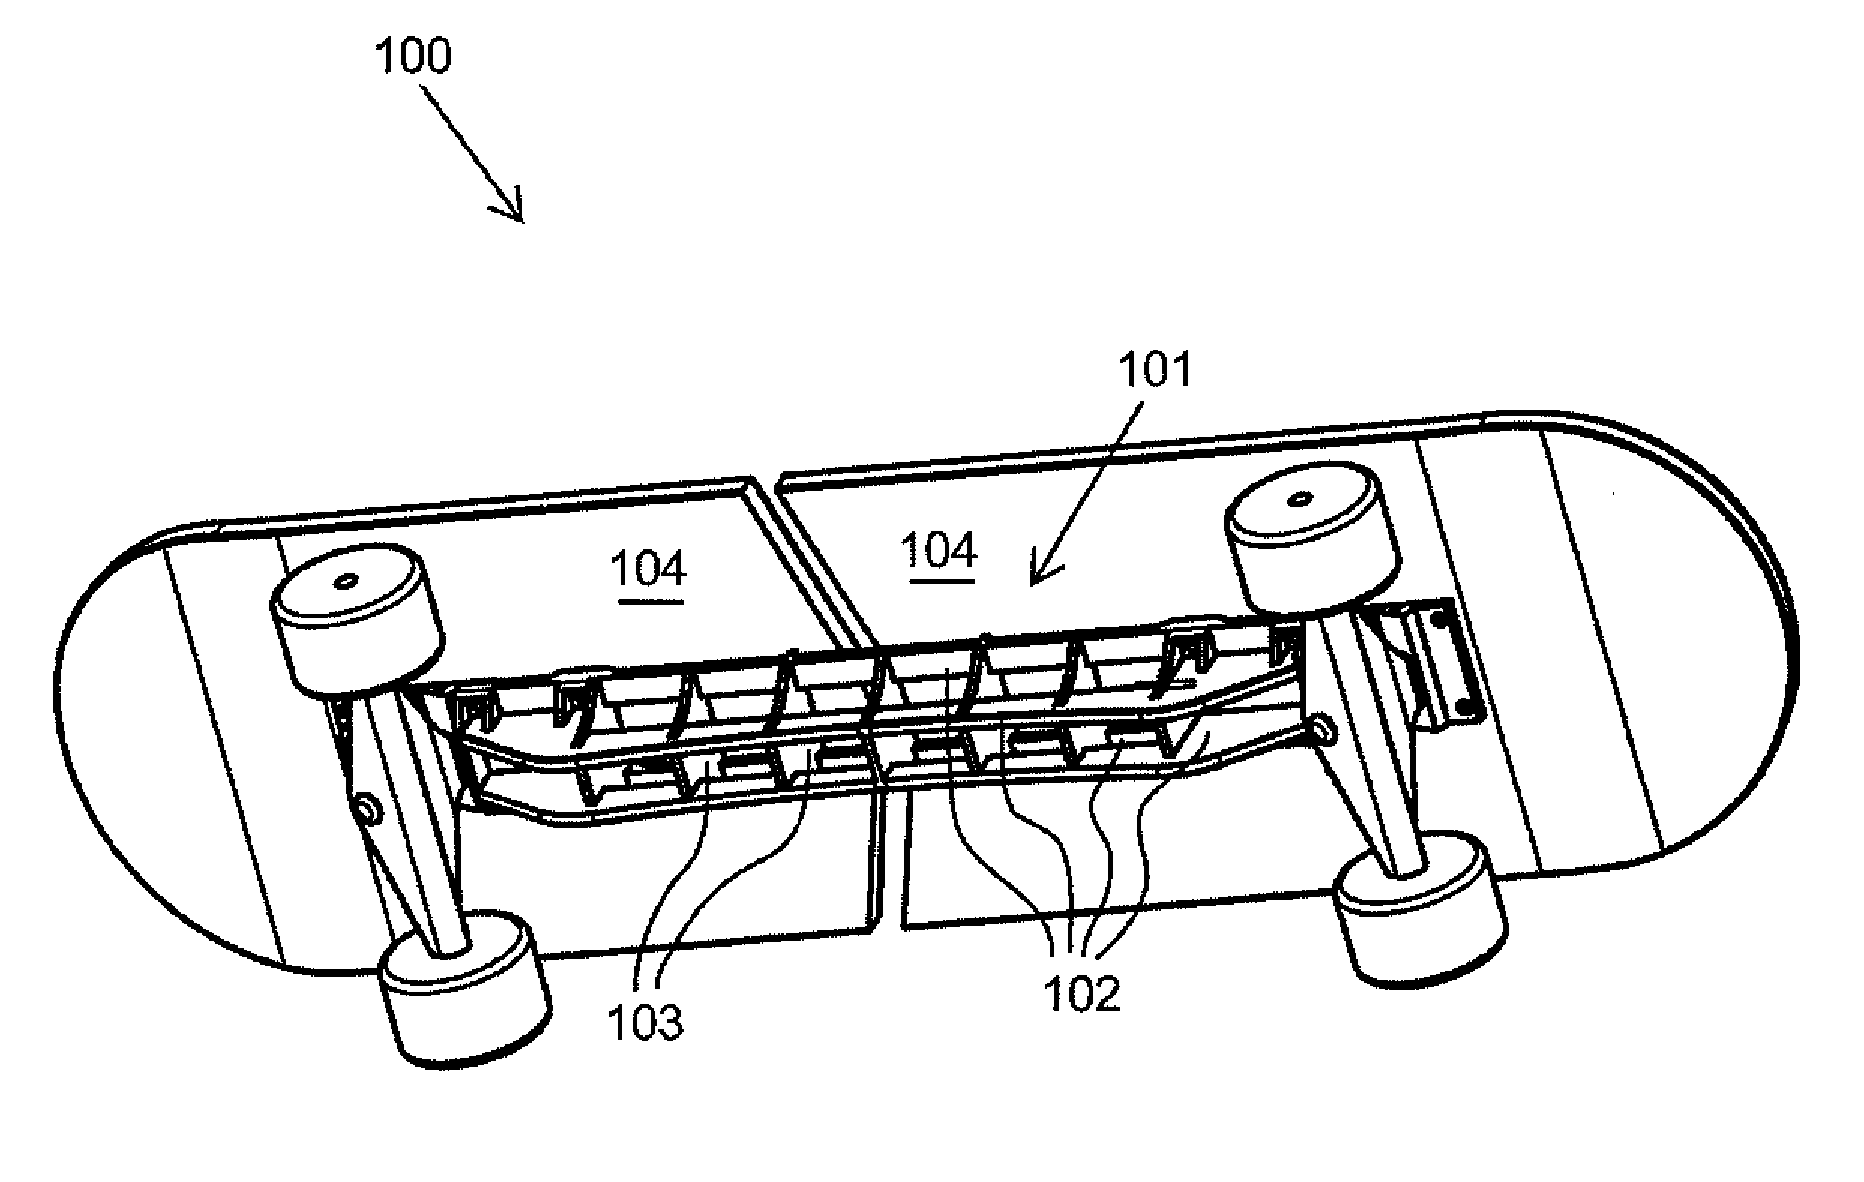 Torsionally flexible connecting structure for transportation device